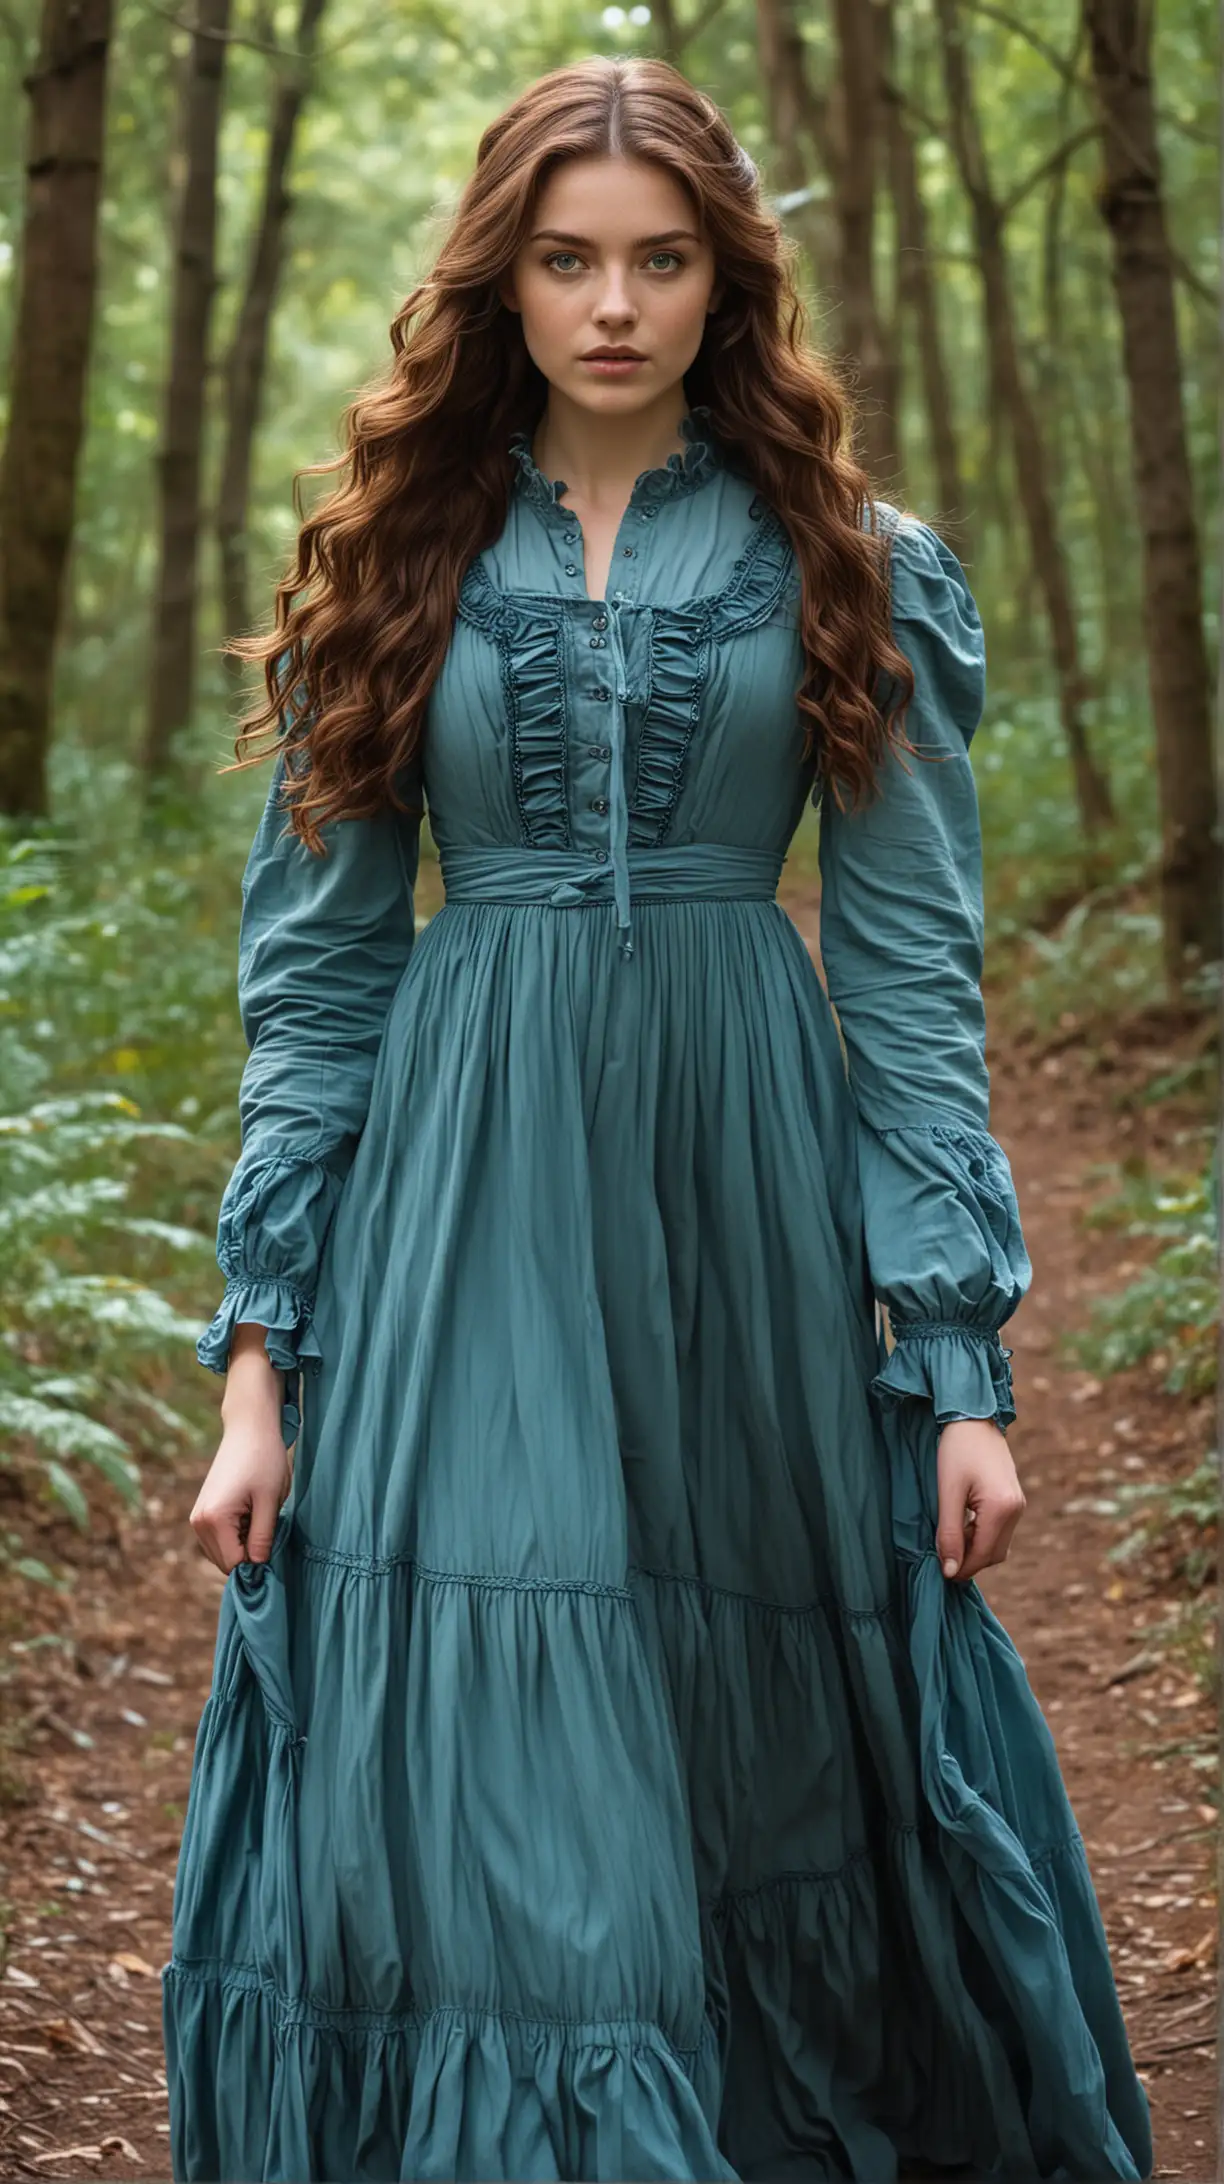 18-year-old girl Julie Roberts with long, wavy, dark-auburn hair, and intense green eyes. She is wearing a blue victorian dress while walking in a forest.